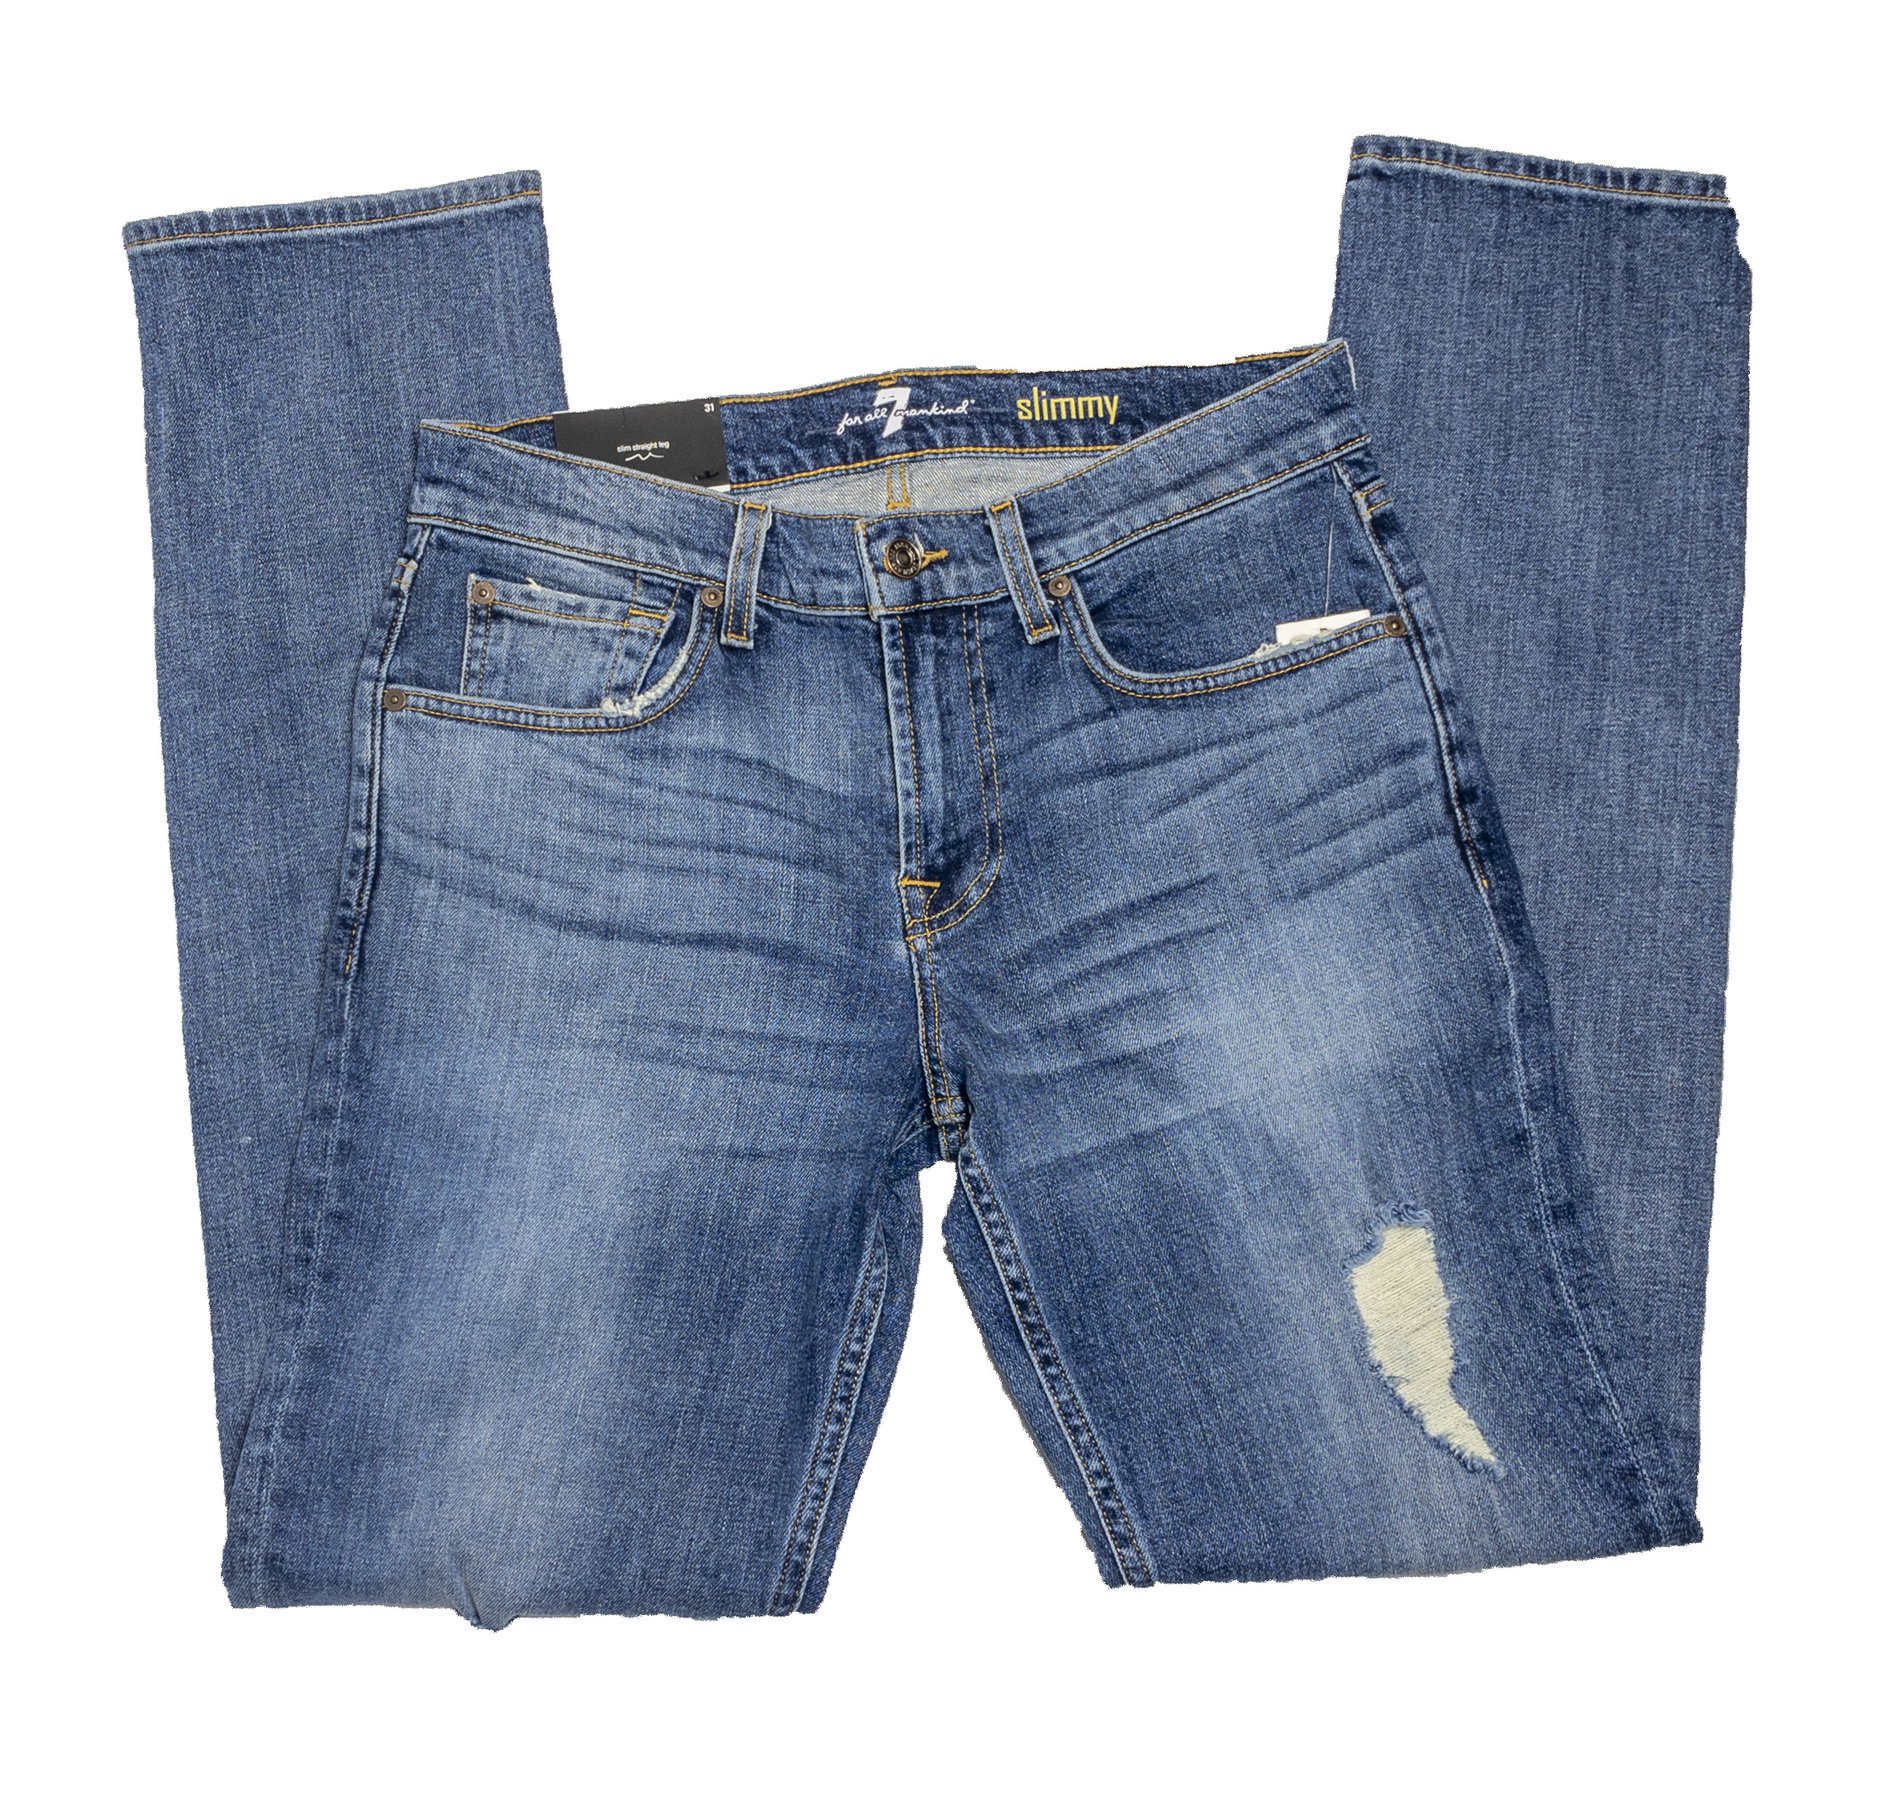 7 for all mankind mens shorts